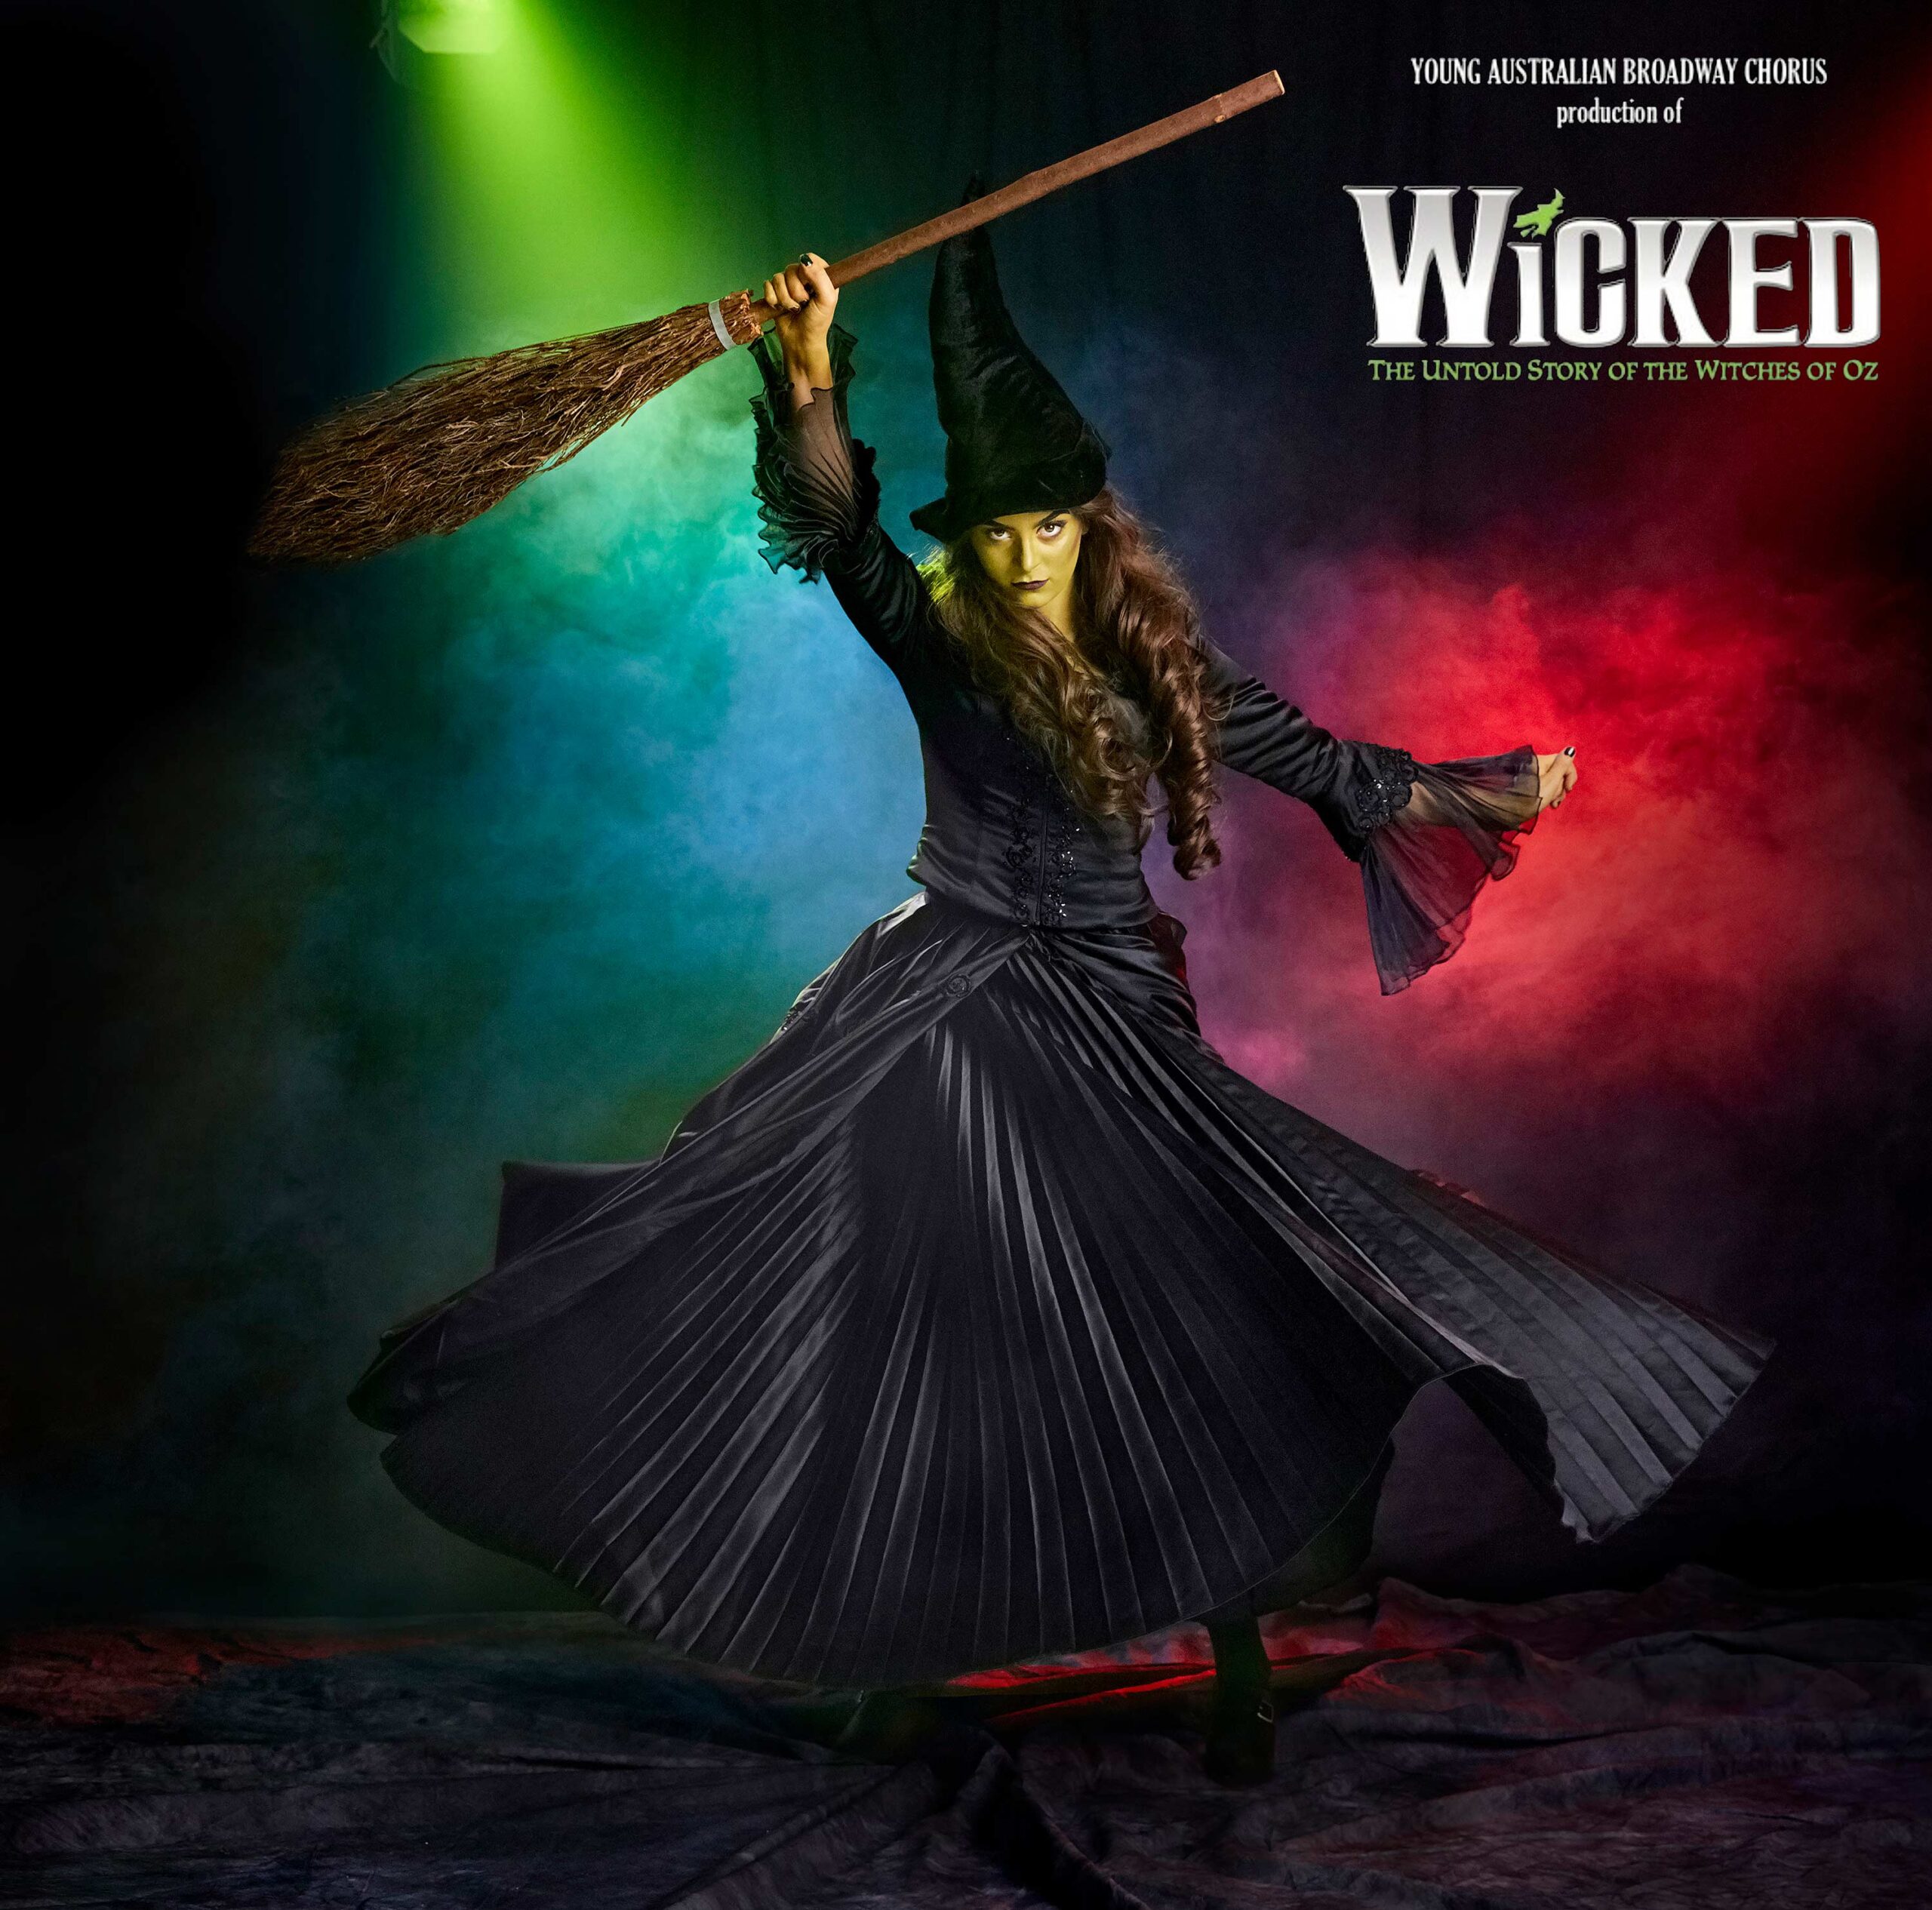 Advertising image for stage school, Australia's production show called wicked. Which holds up a broomstick on stage.